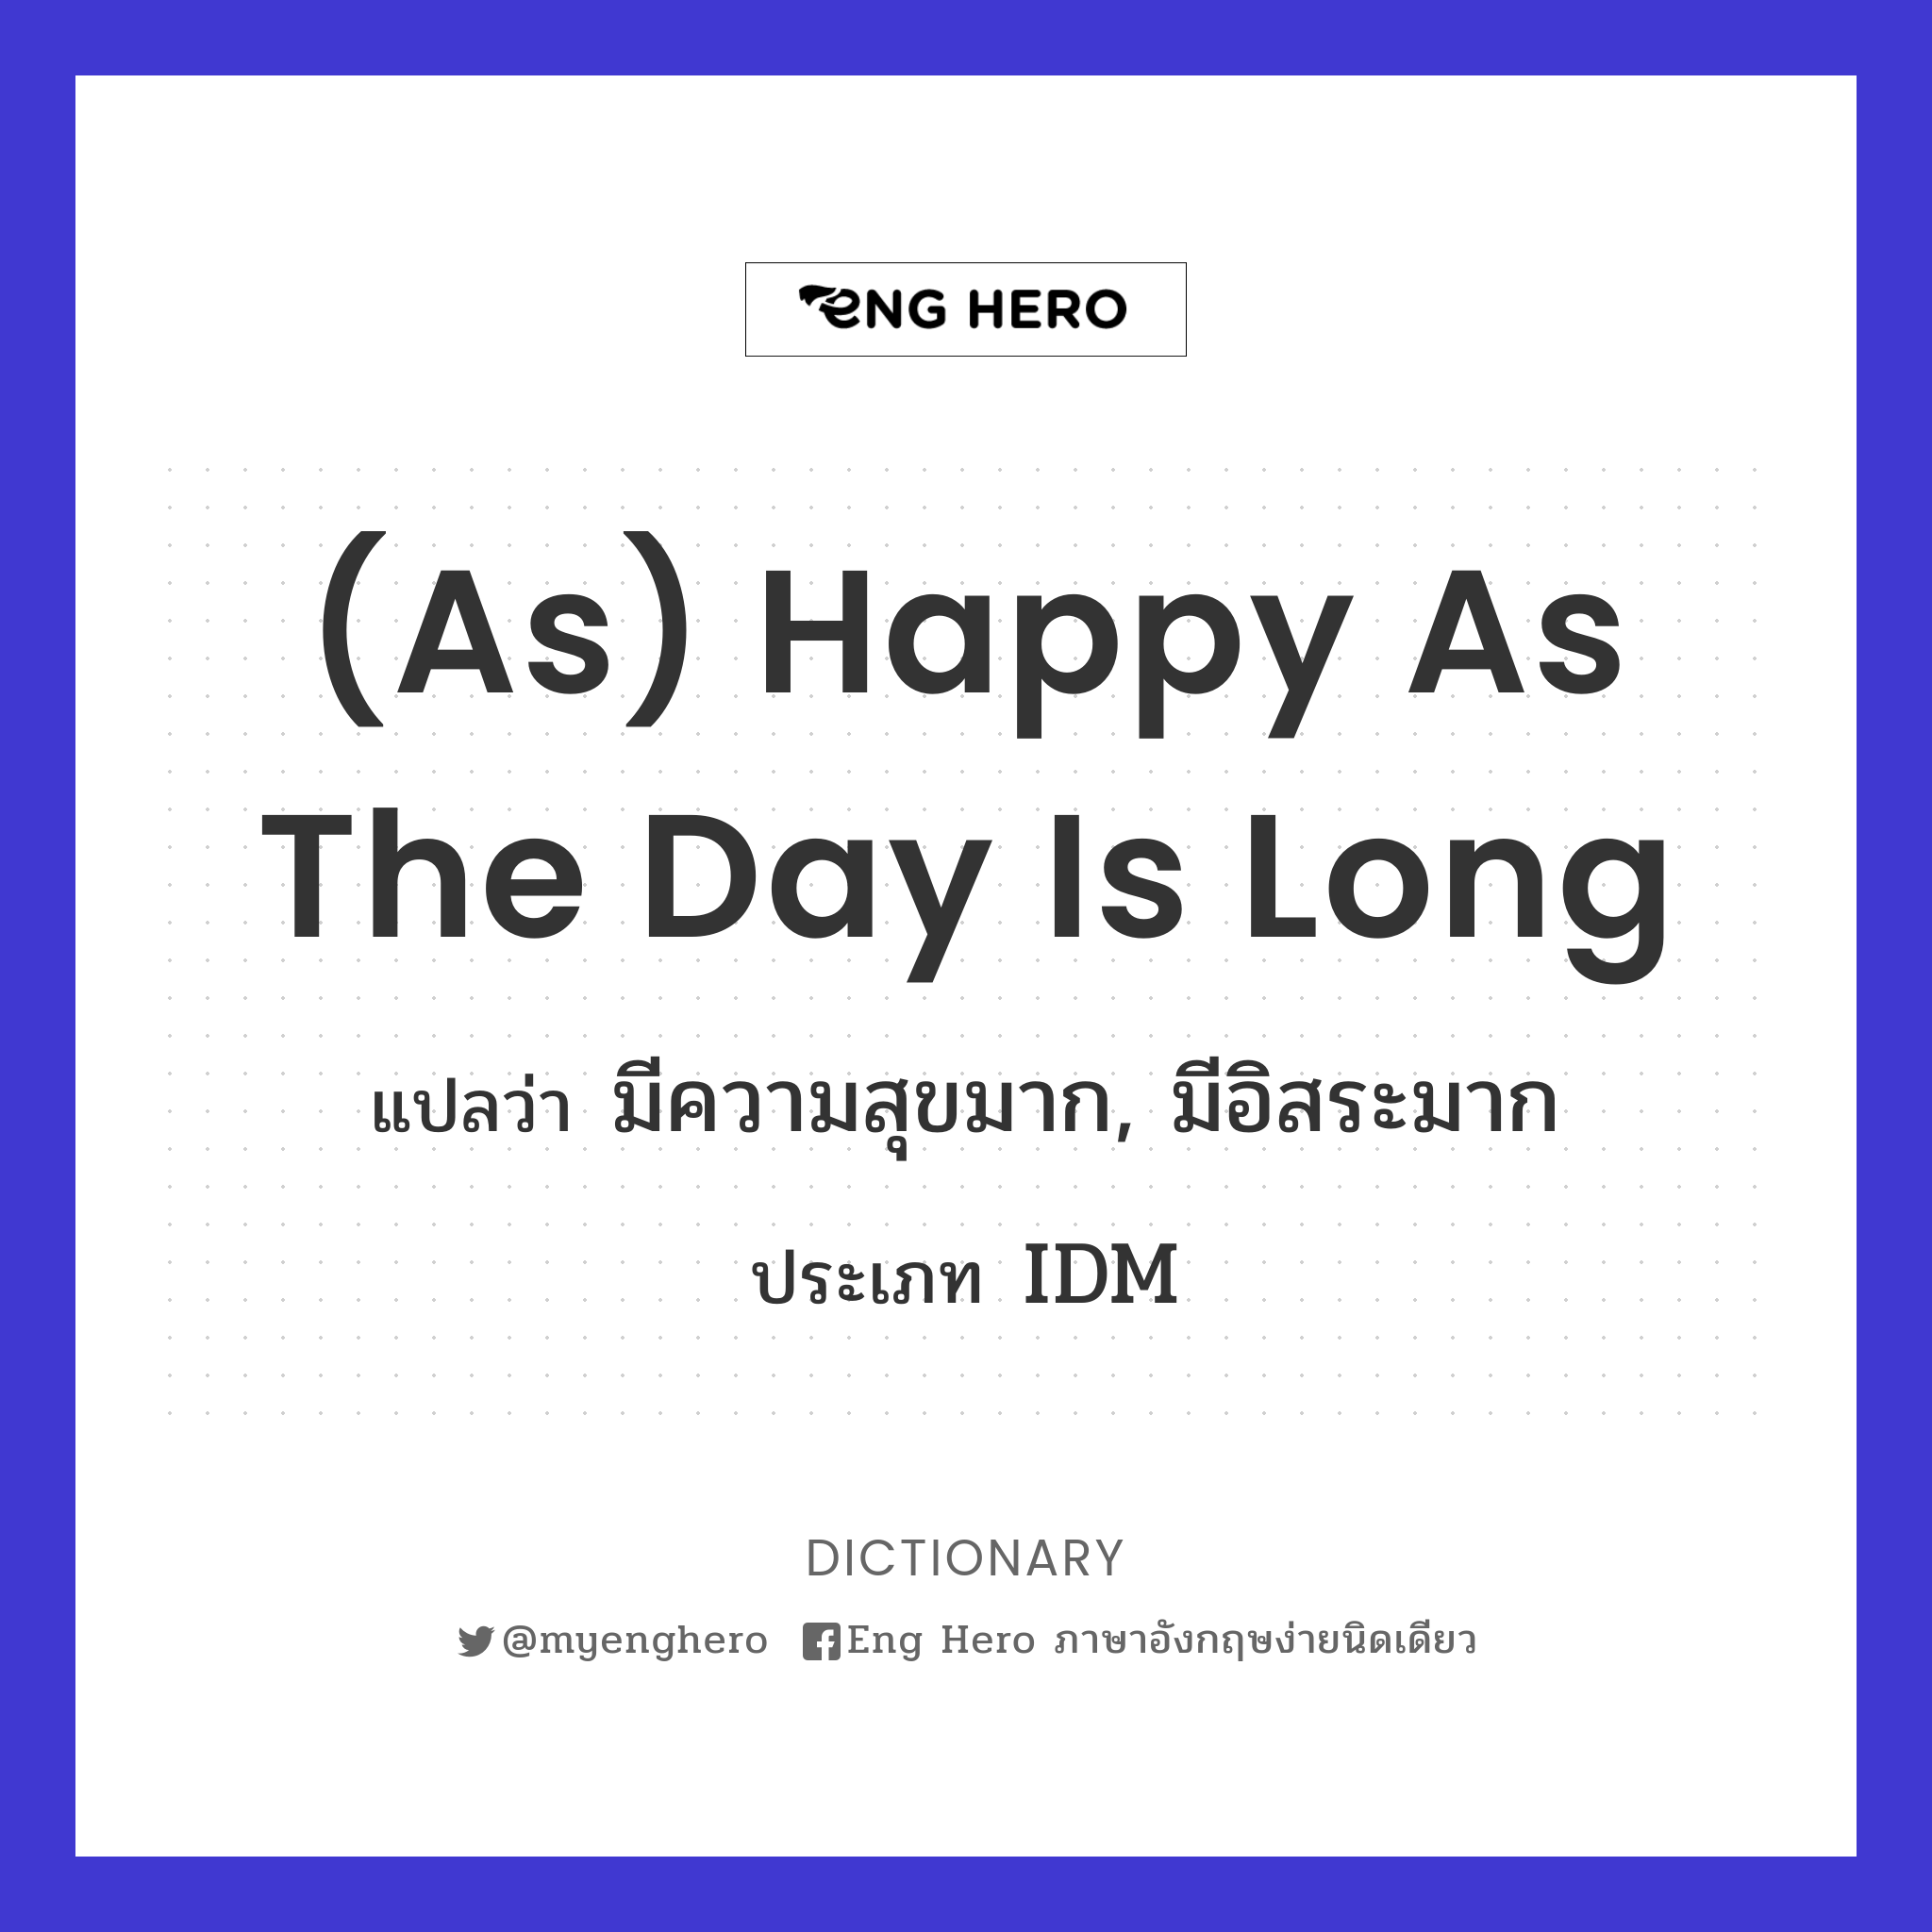 (as) happy as the day is long